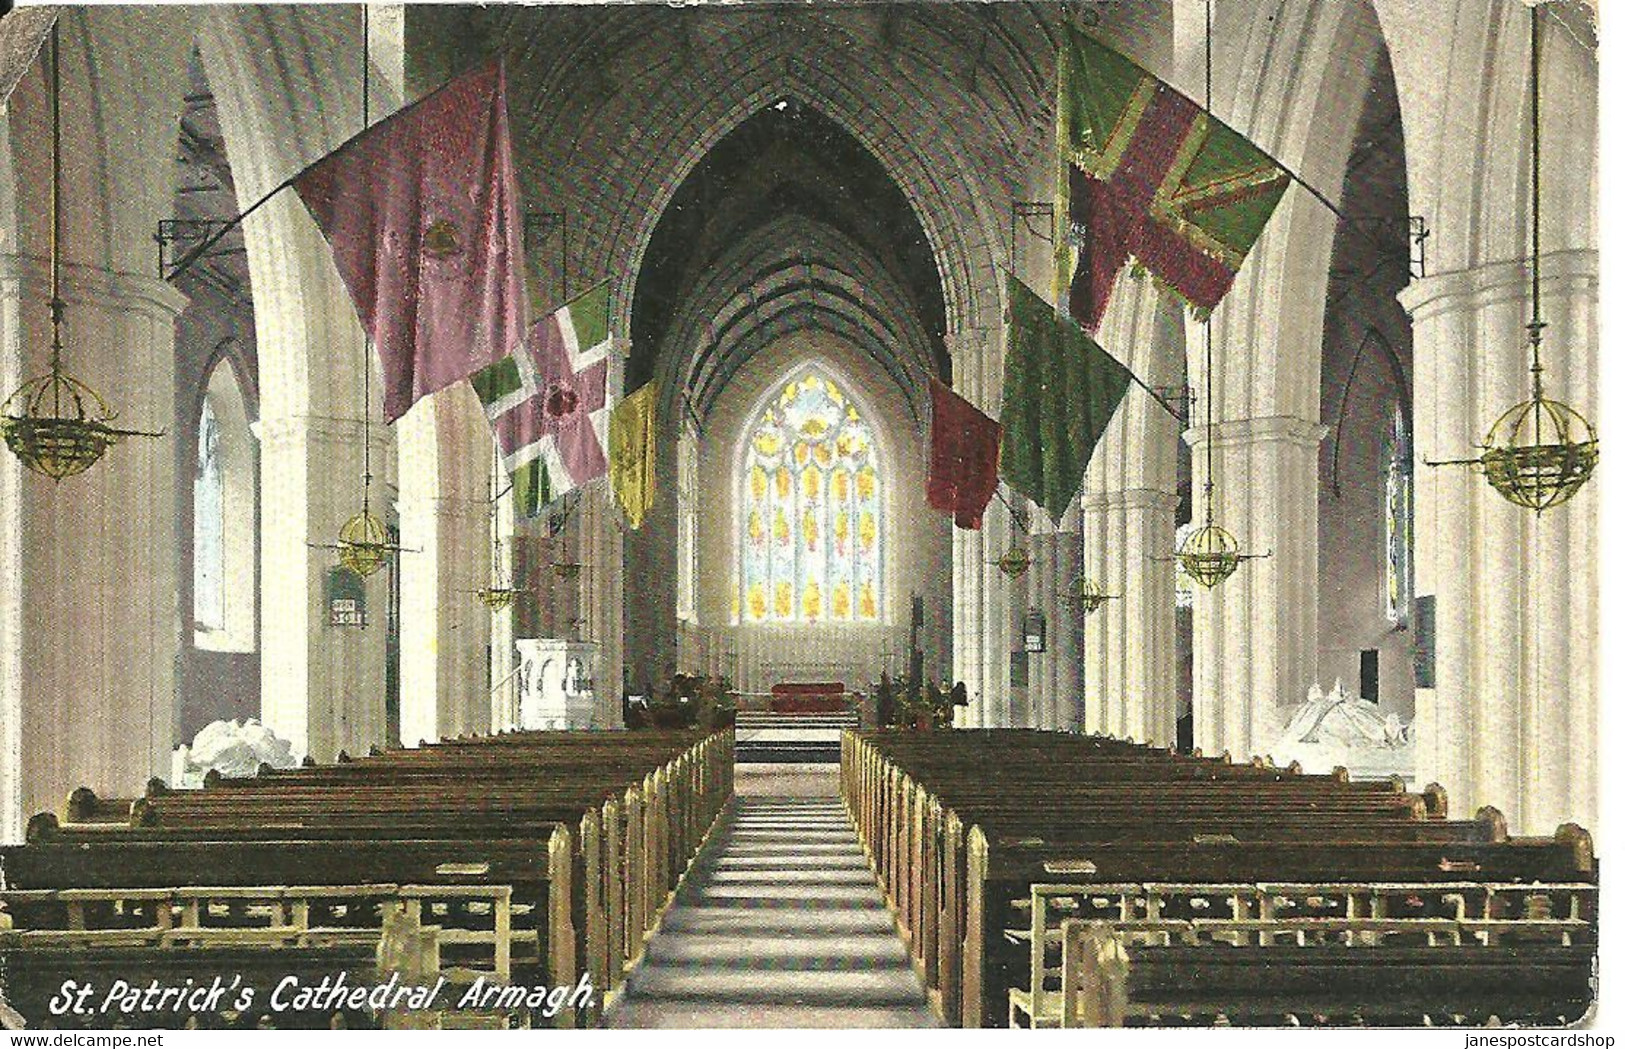 INTERIOR - ST. PATRICKS CATHEDRAL - ARMAGH - PUBLISHER - LAWRENCE - DUBLIN - Armagh